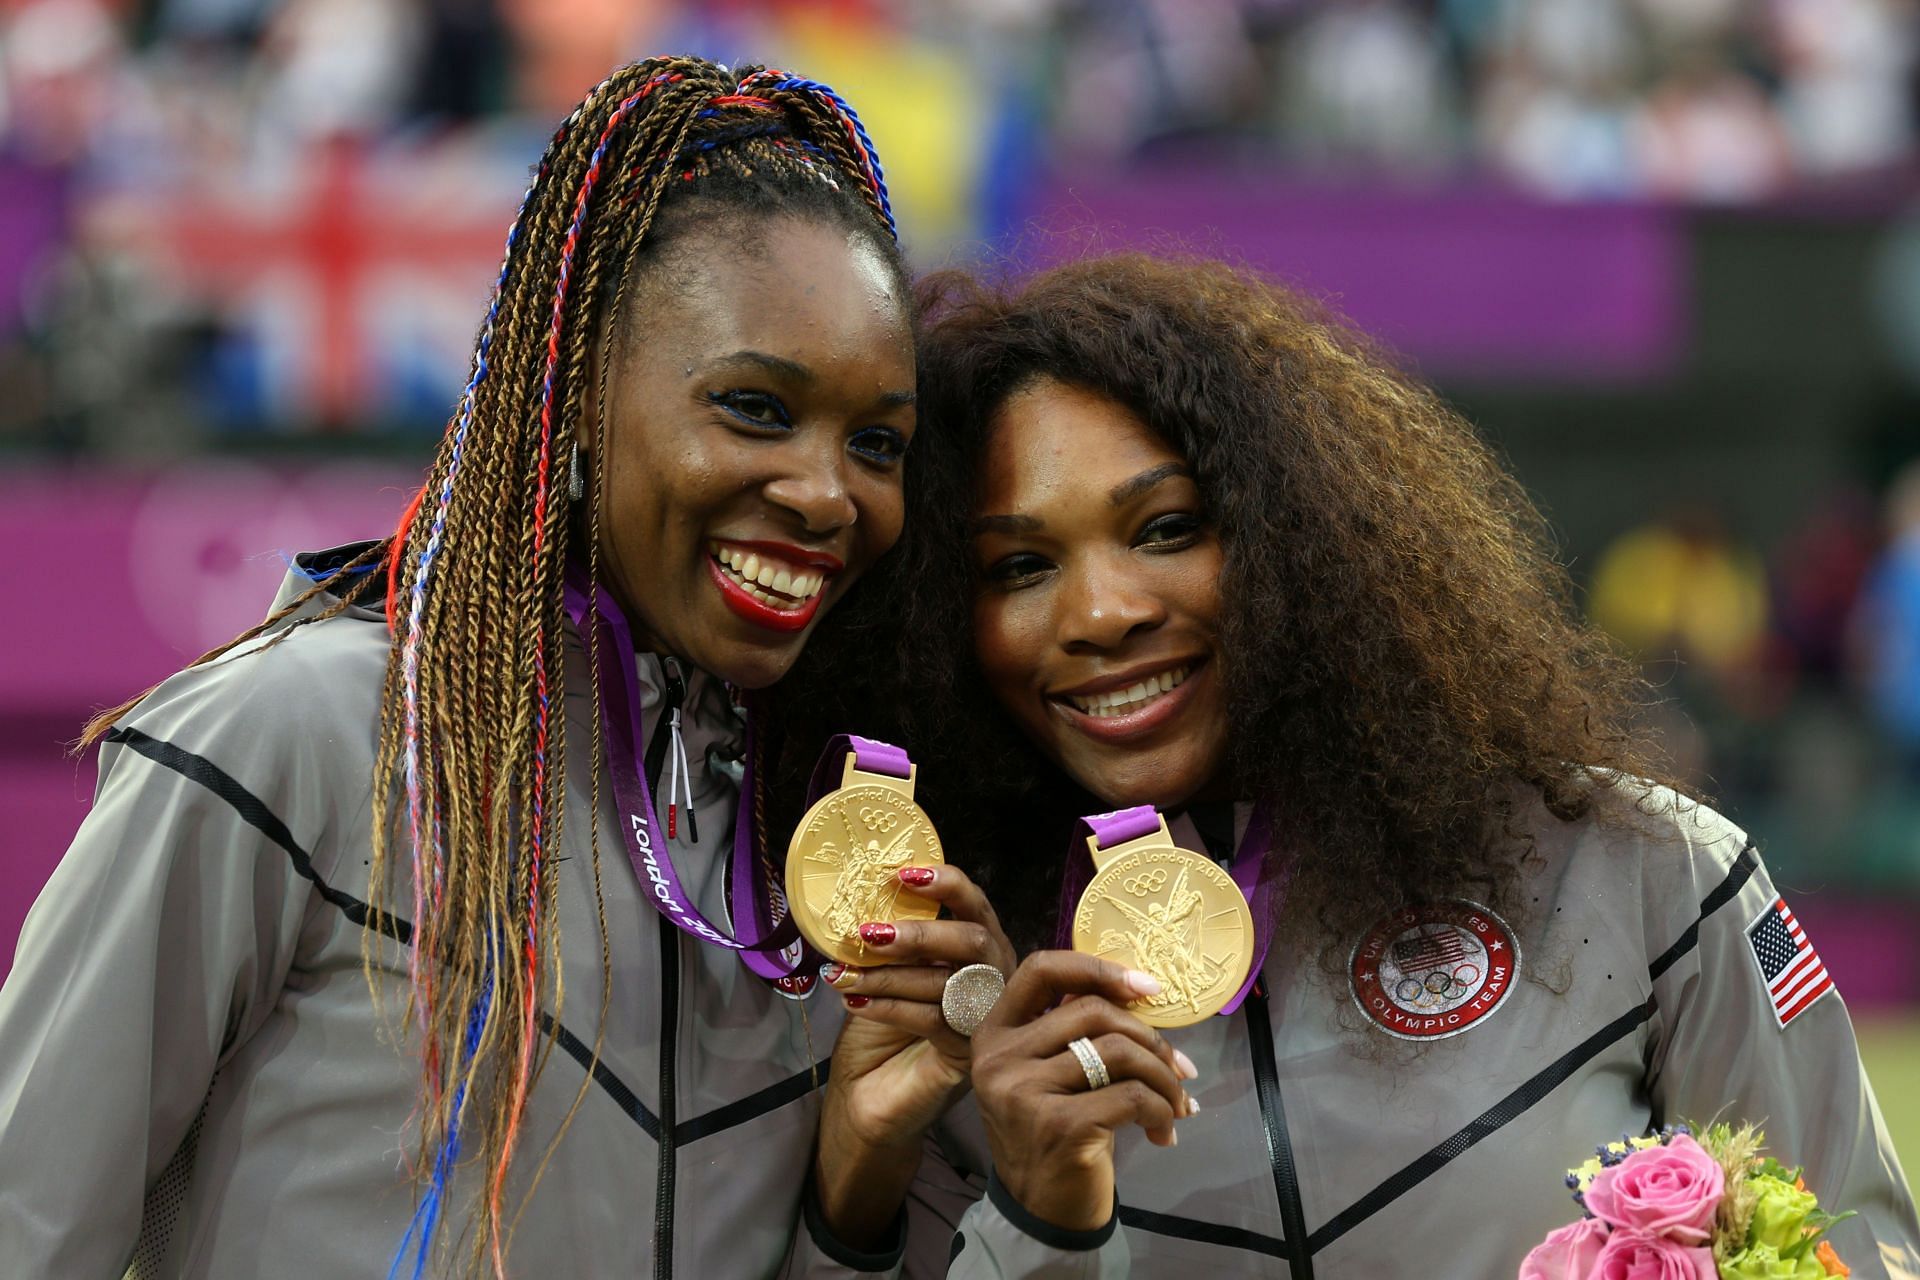 Venus Williams and Serena Williams pose after winning gold at the 2012 London Olympics.